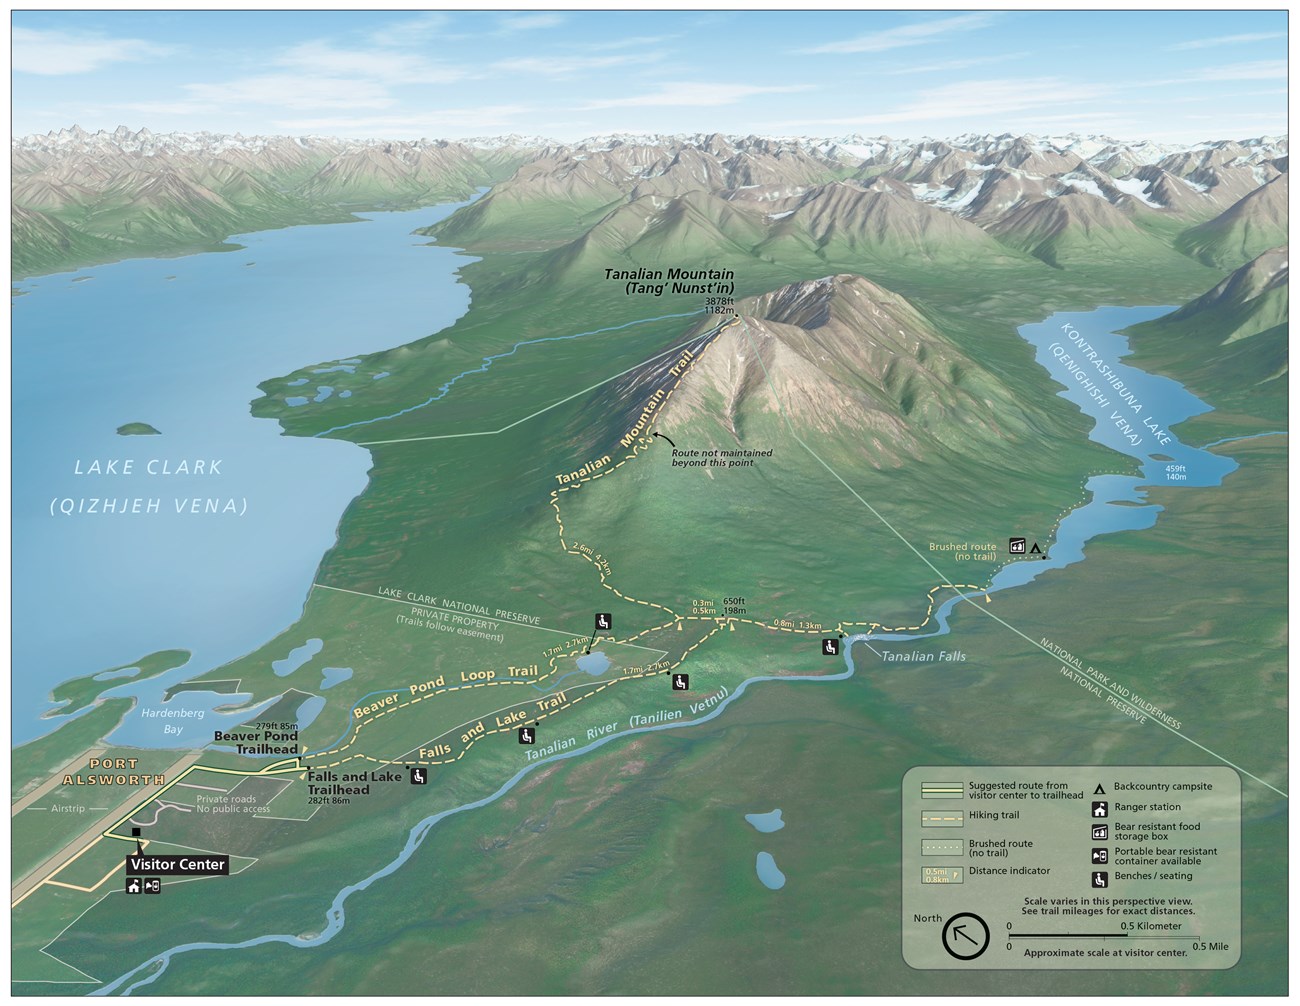 map of the Tanalian Trails system in Port Alsworth, showing the Falls and Lake Trail, Beaver Pond Trail, and the Tanalian Mountain Trail